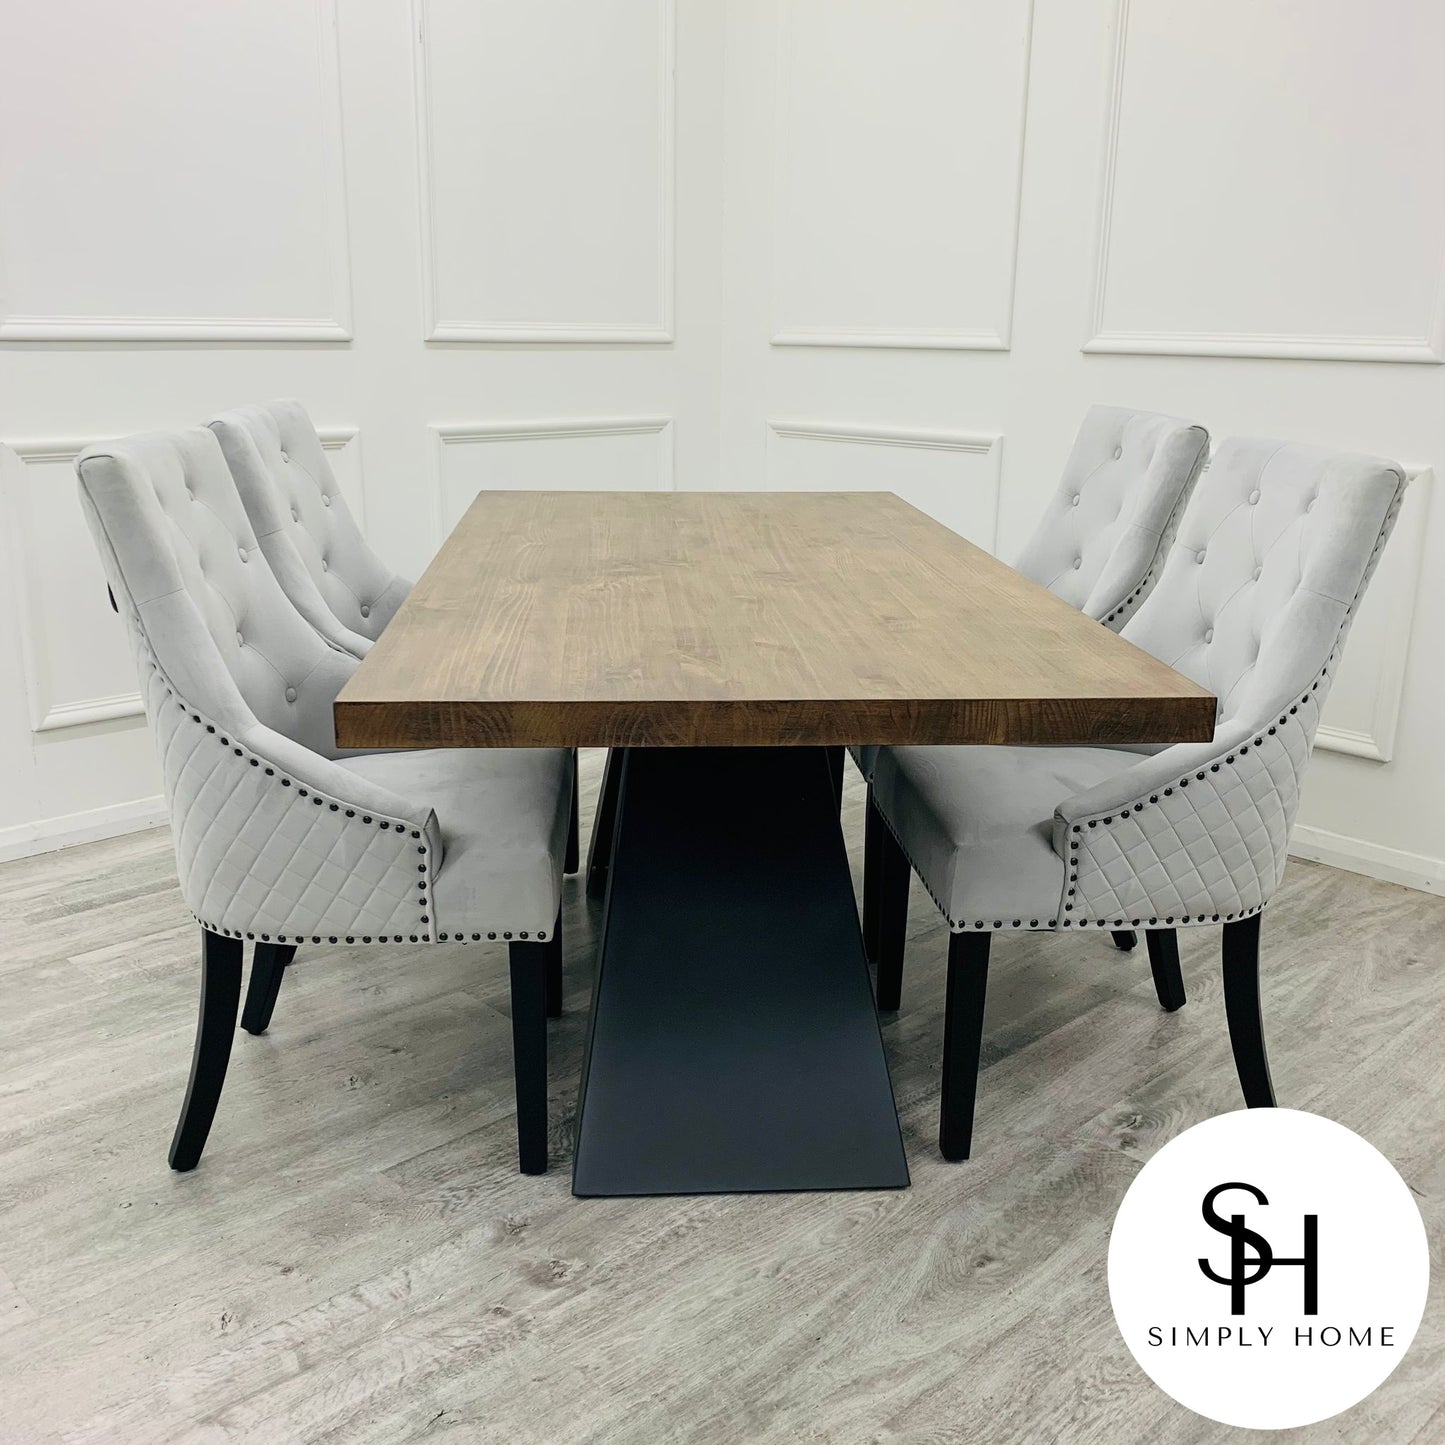 Axel 1.8m Dining Table with Bentley Black Leg Dining Chairs